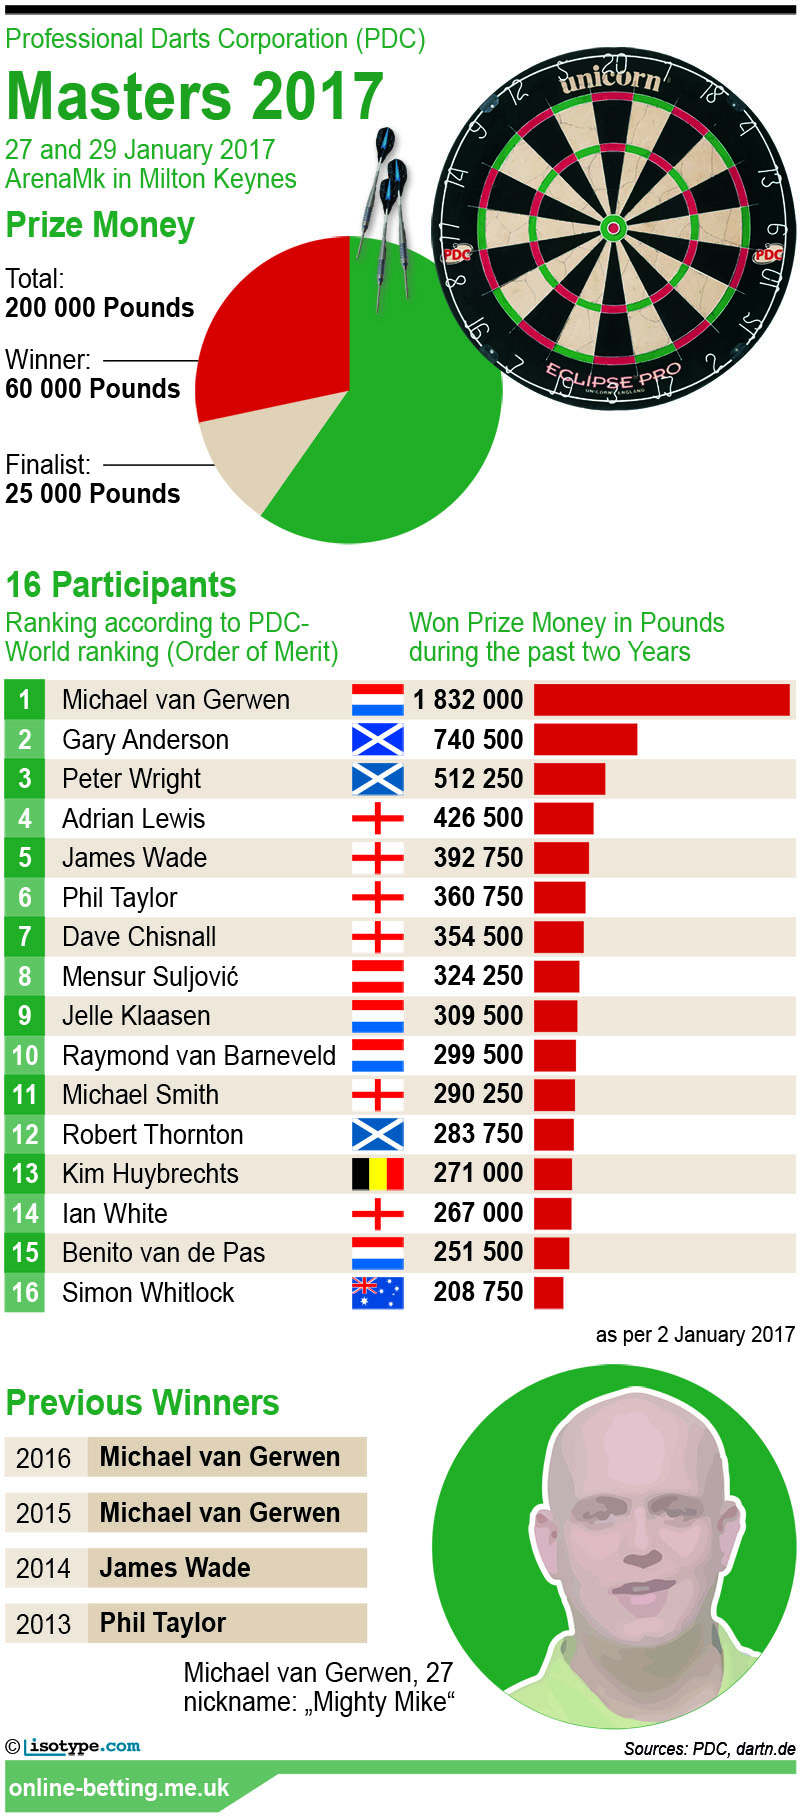 PDC Darts Masters 2017 Infographic